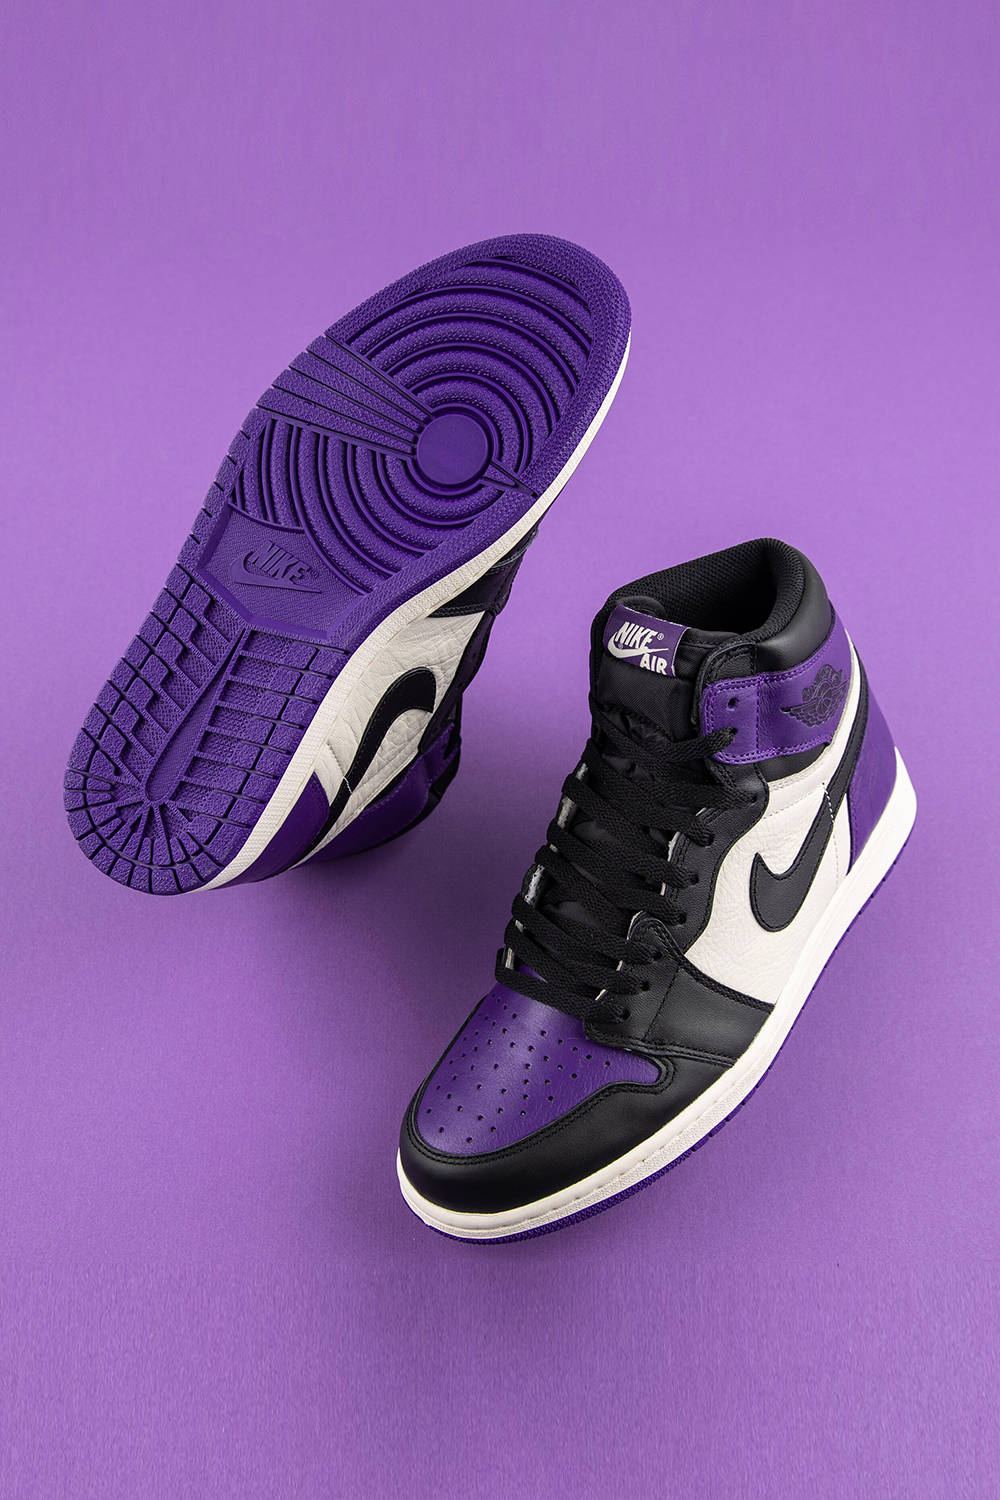 Purple Jordans: Choose the perfect shoes for your daily look Wallpaper